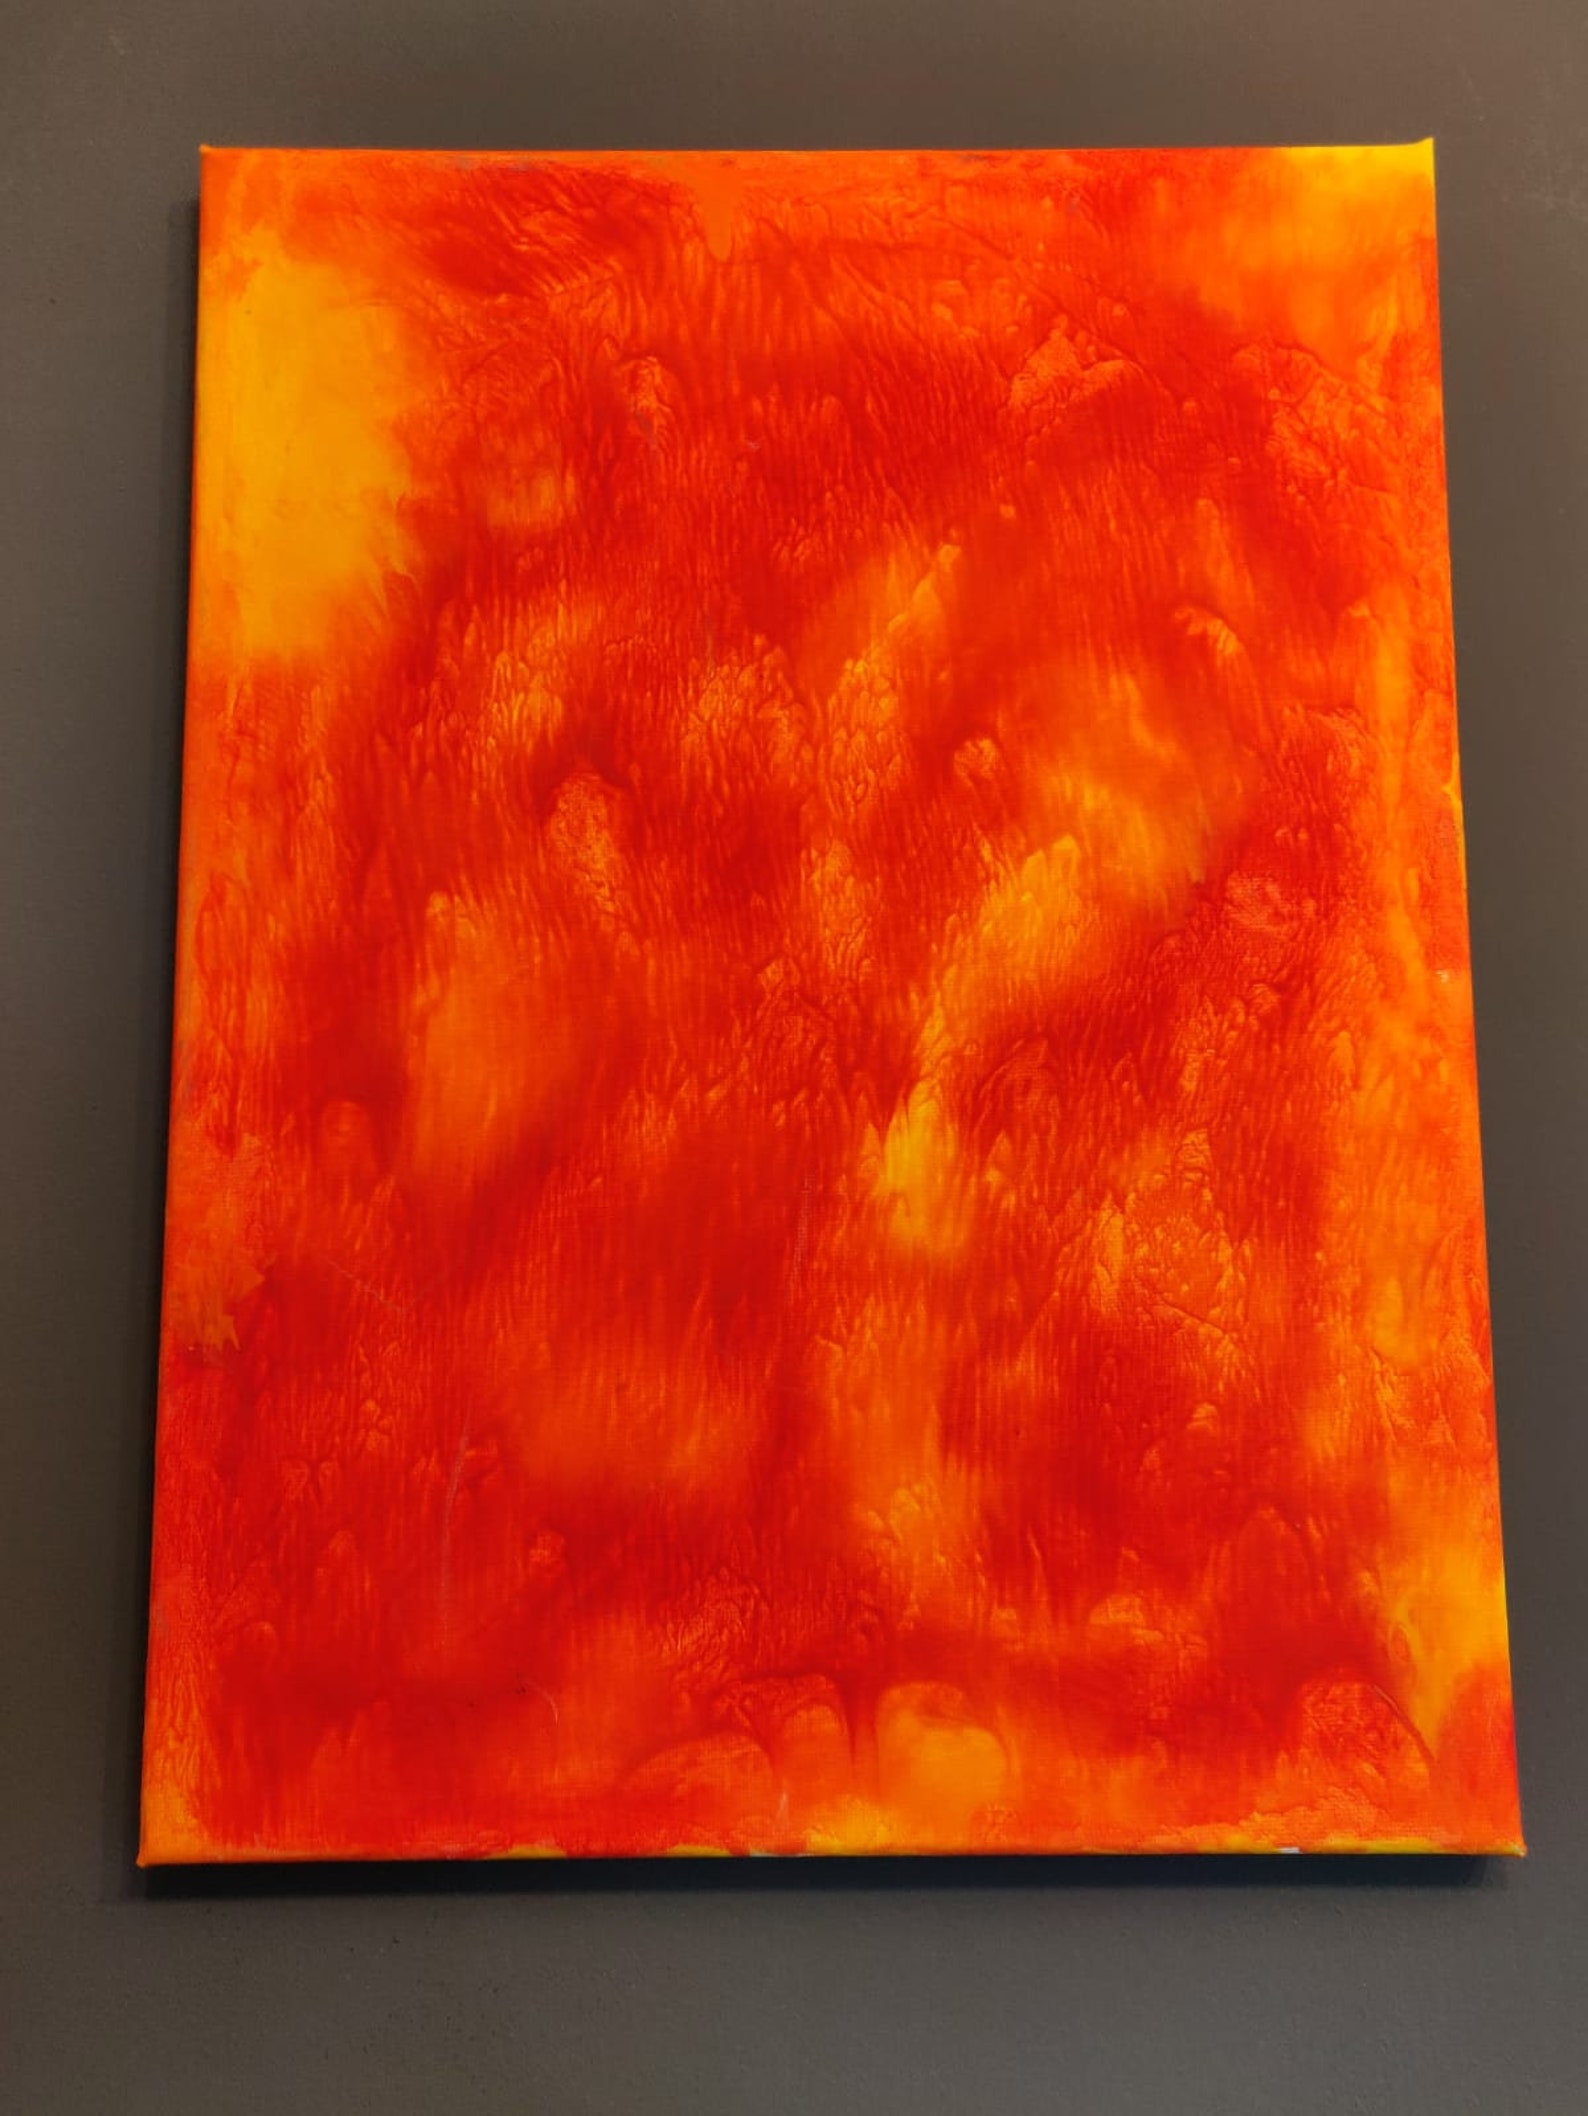 Orange Red and Yellow Sunset Abstract Canvas Painting | Etsy